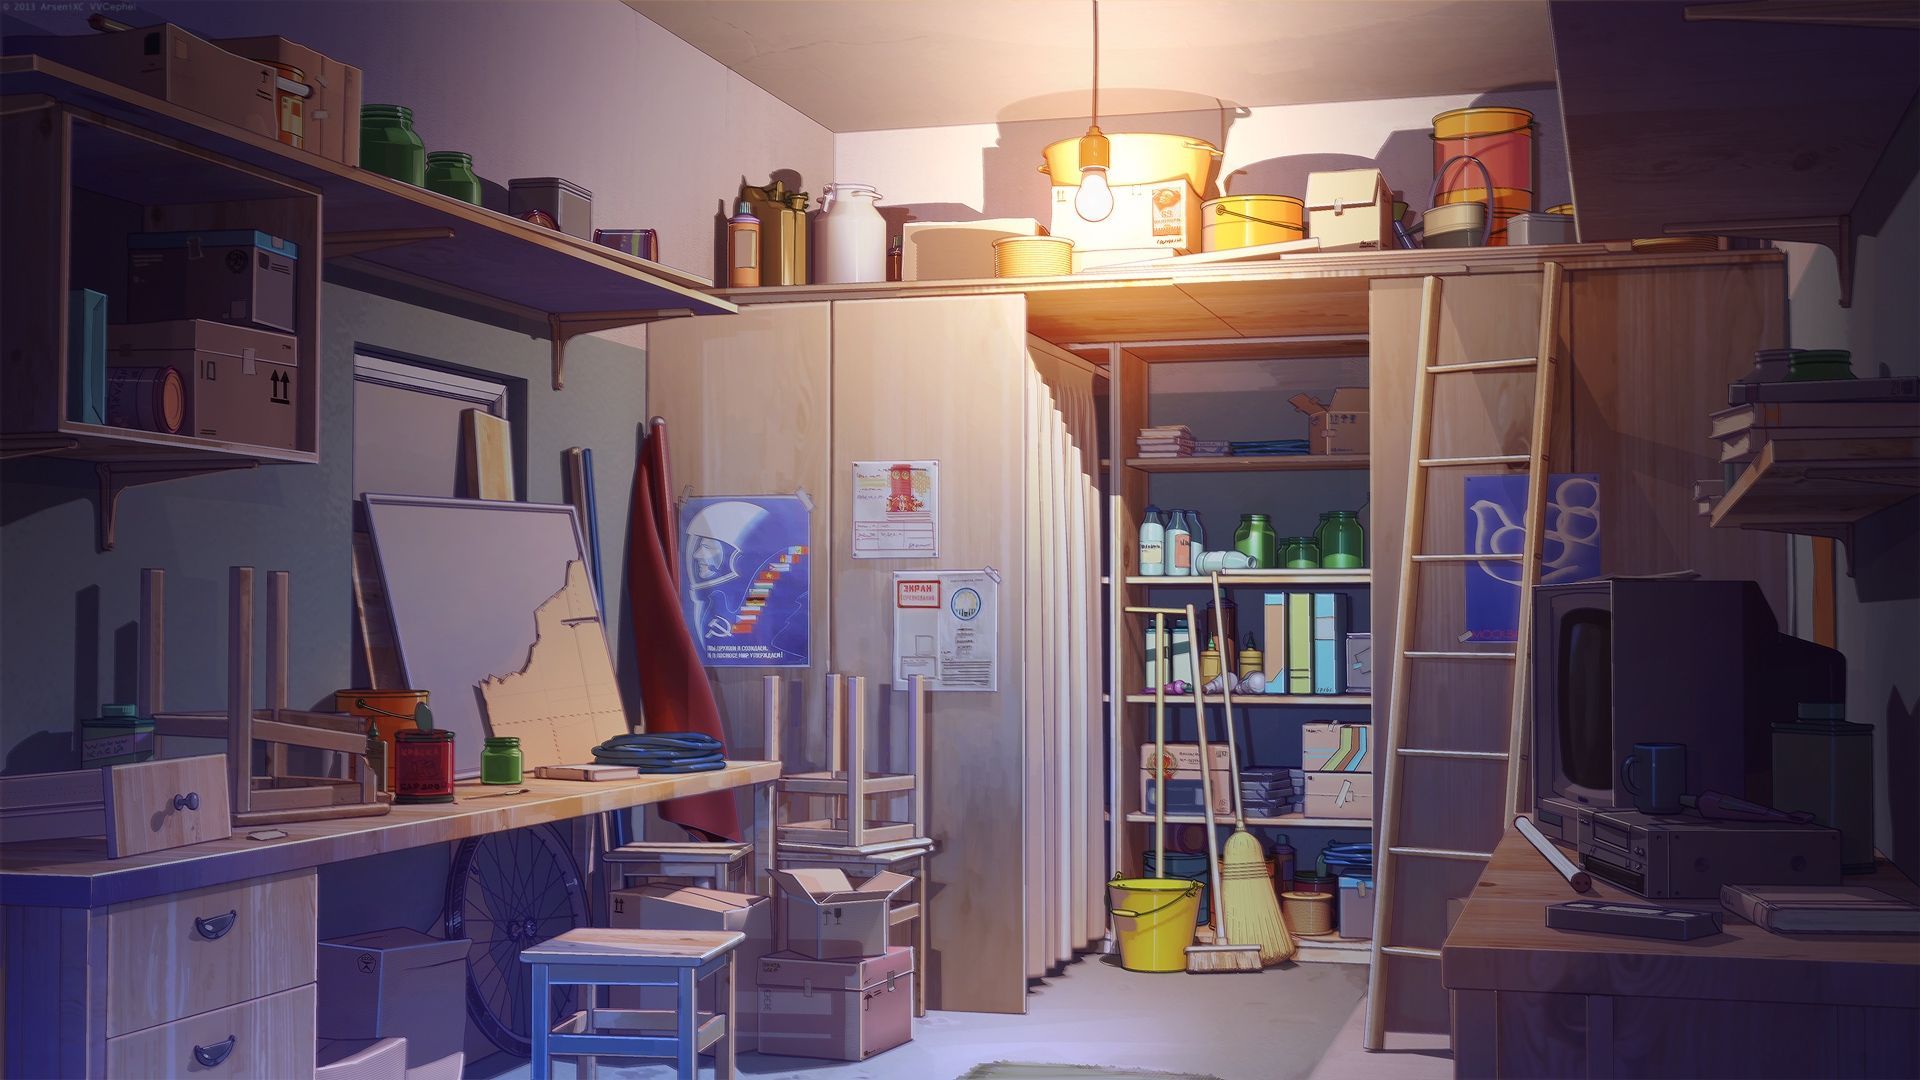 Free Download Messy Room 1.1 for PC